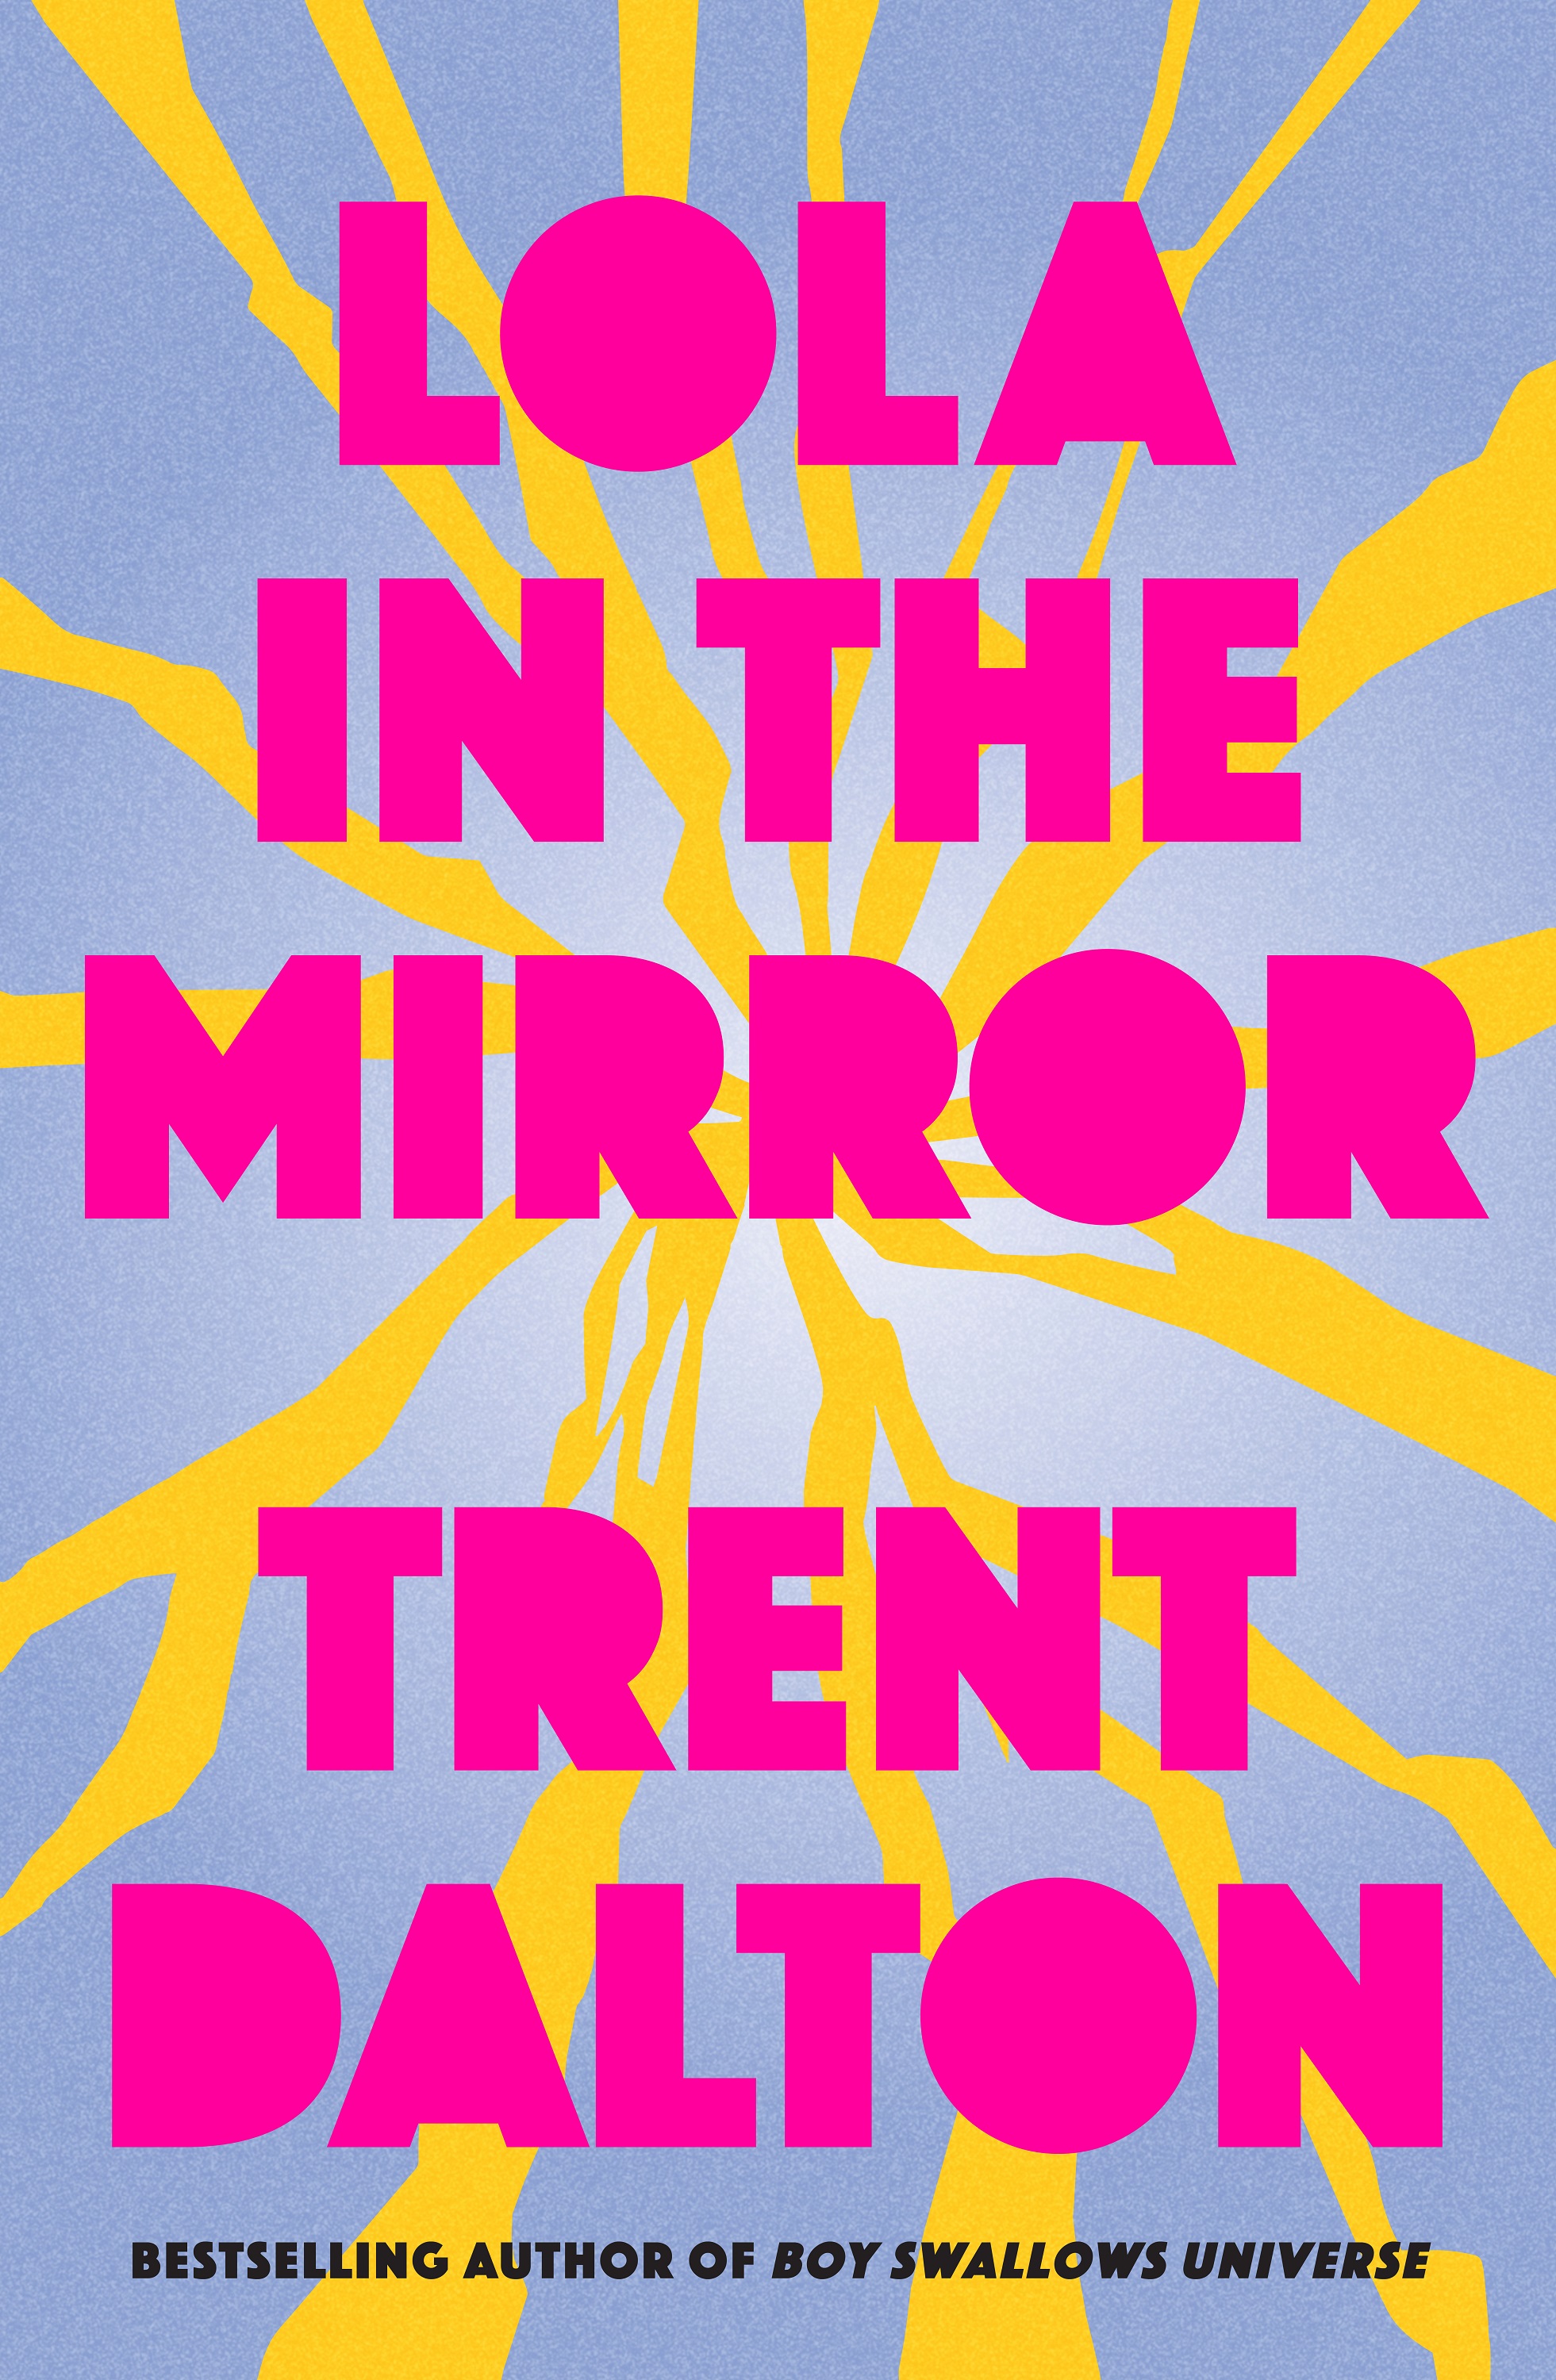 A book cover showing yellow cracks on a light blue background, overlaid by large hot pink text